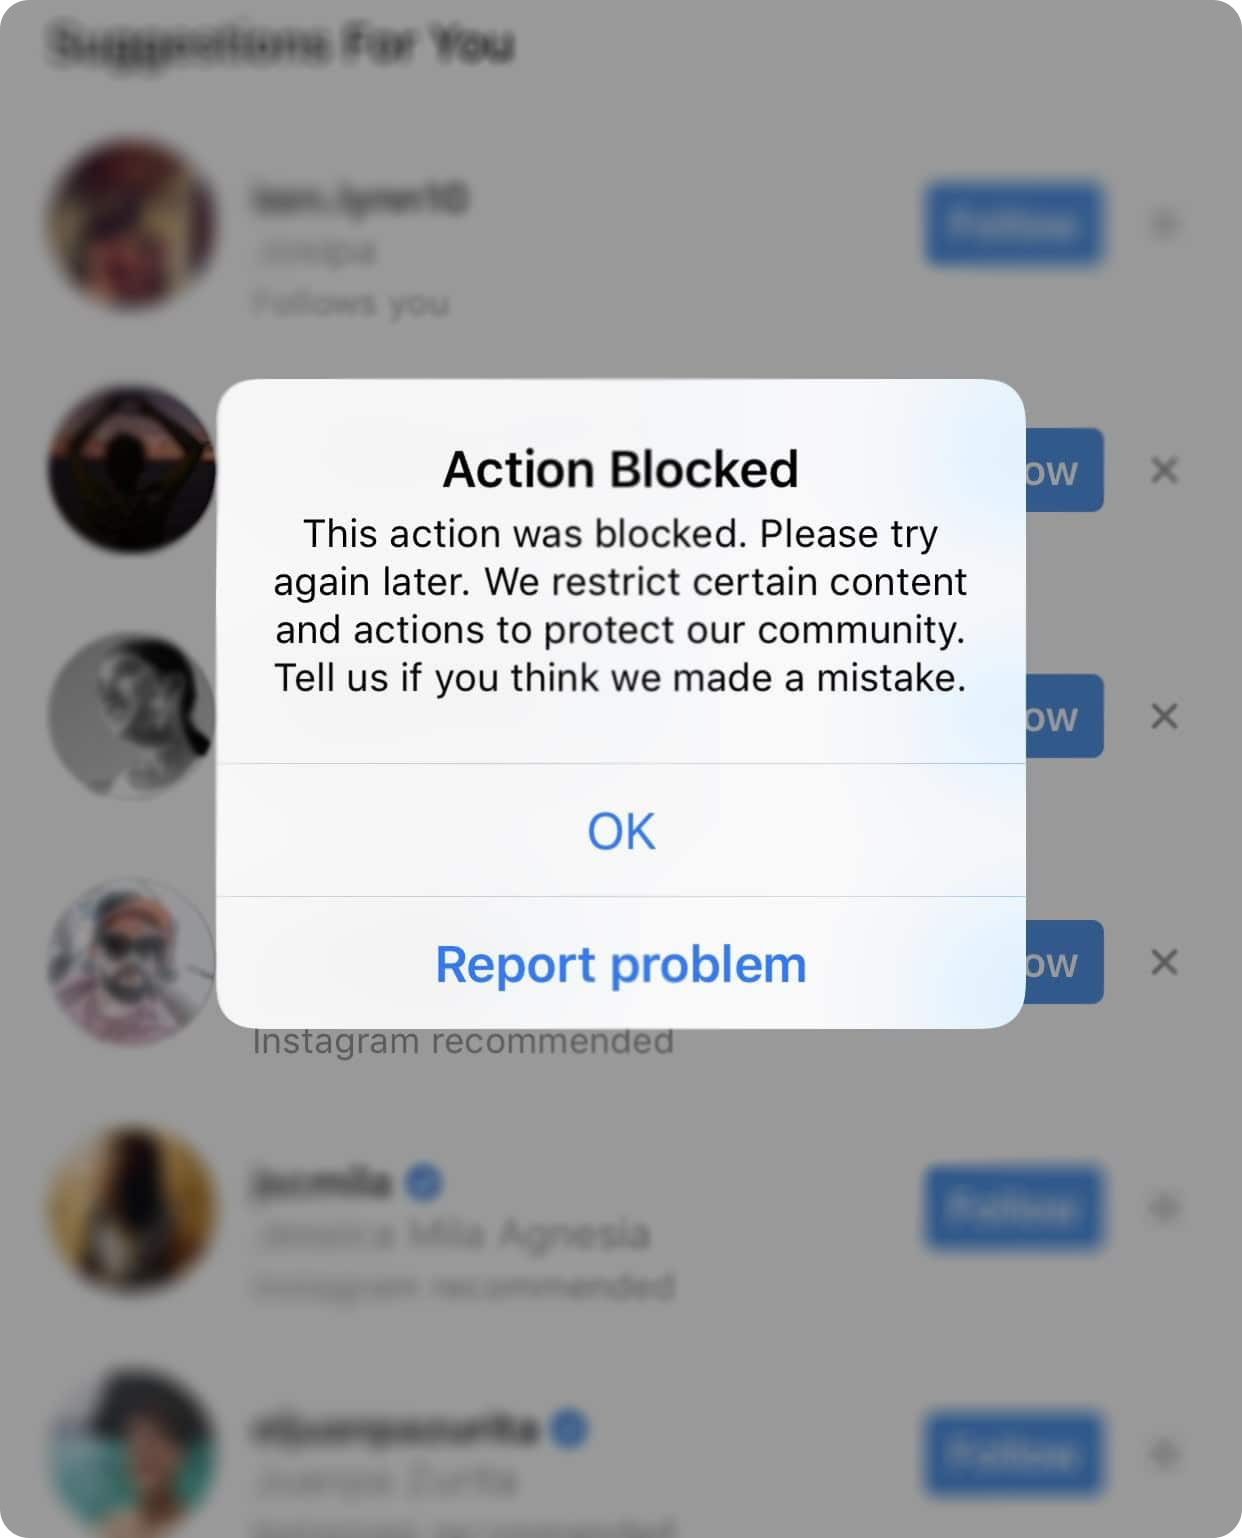 Remote.tools shows a screenshot from Instagram of action blocked. Source: Fangage